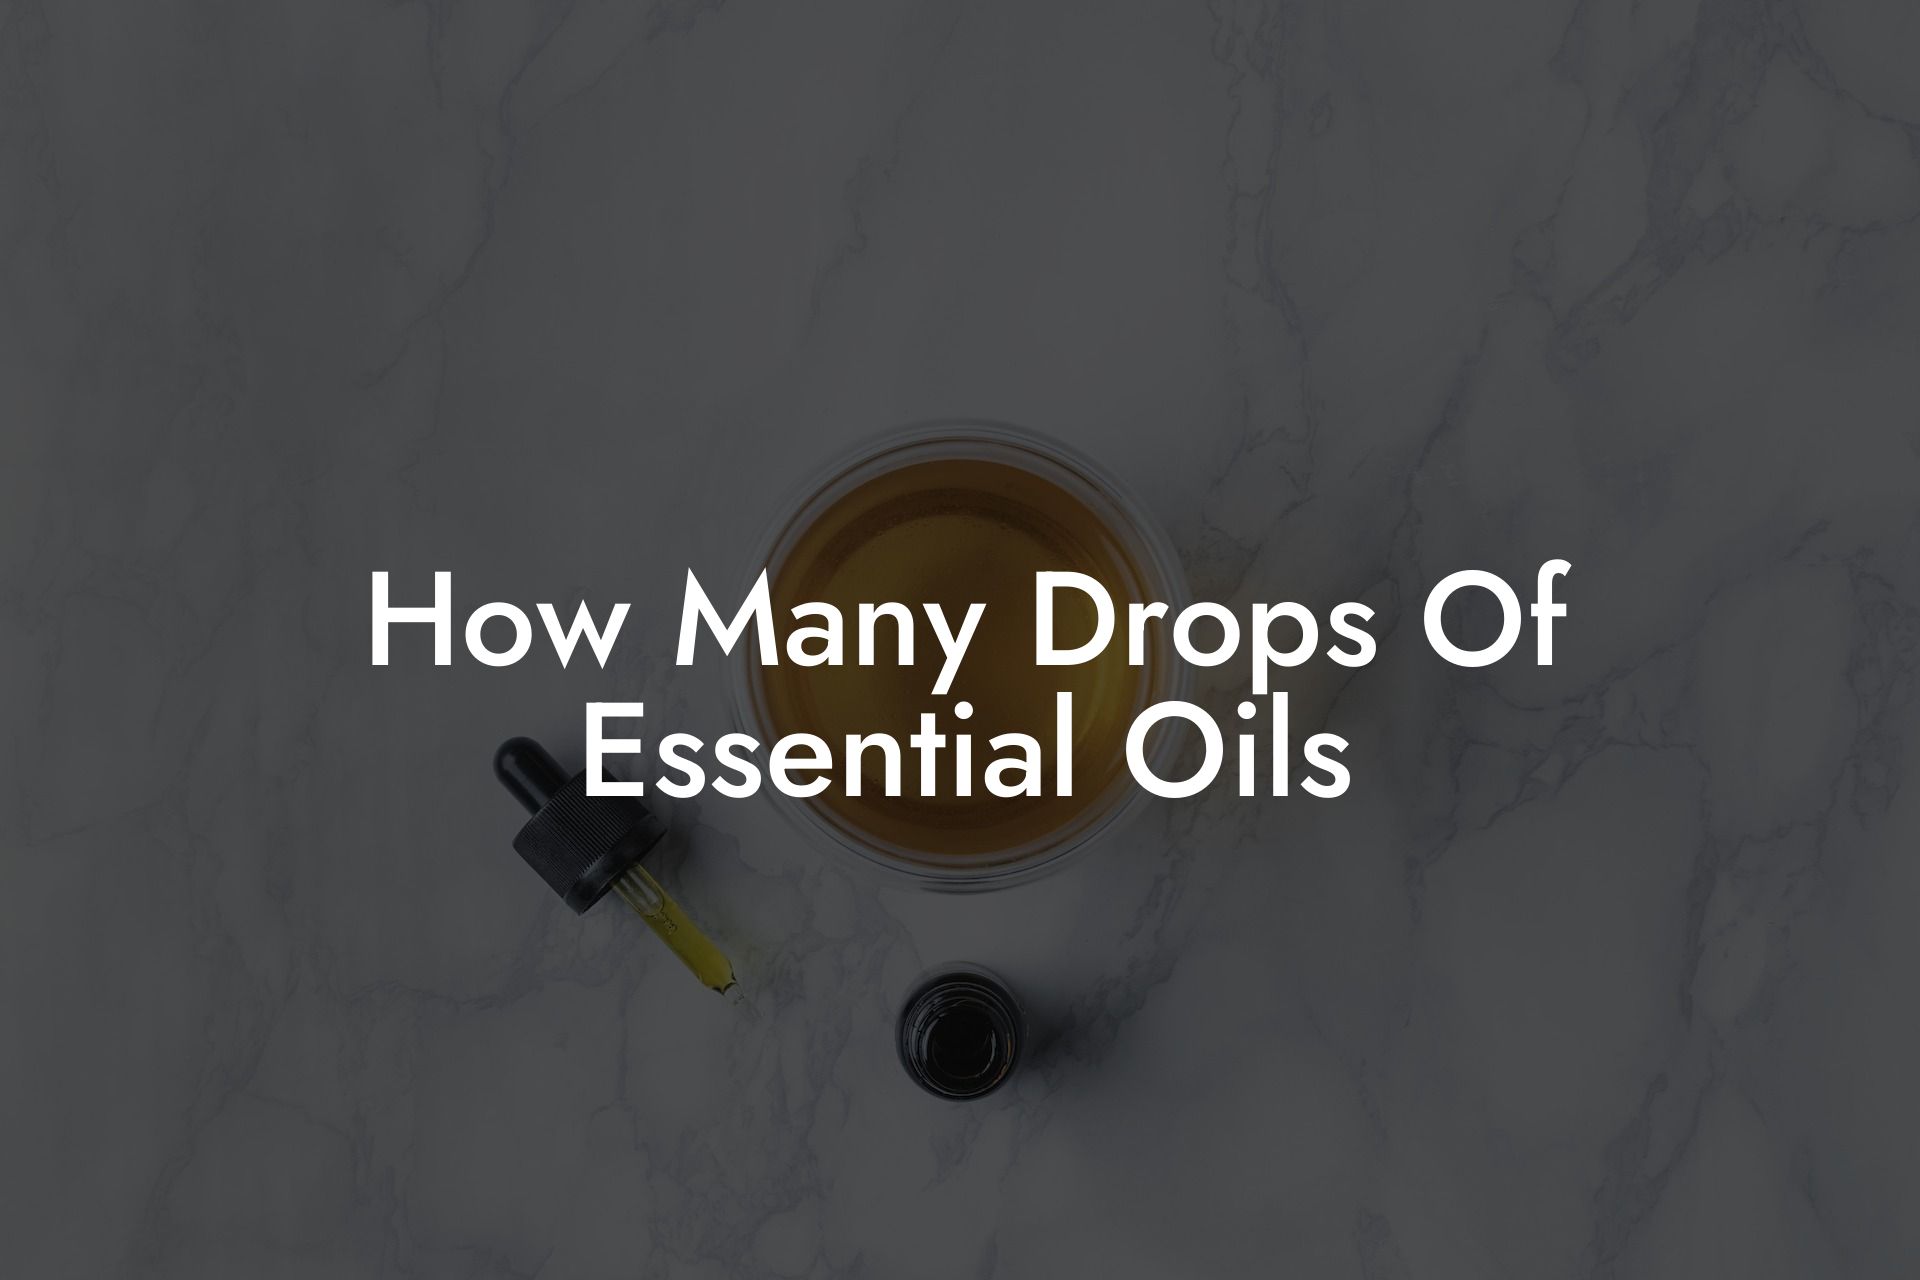 How Many Drops Of Essential Oils